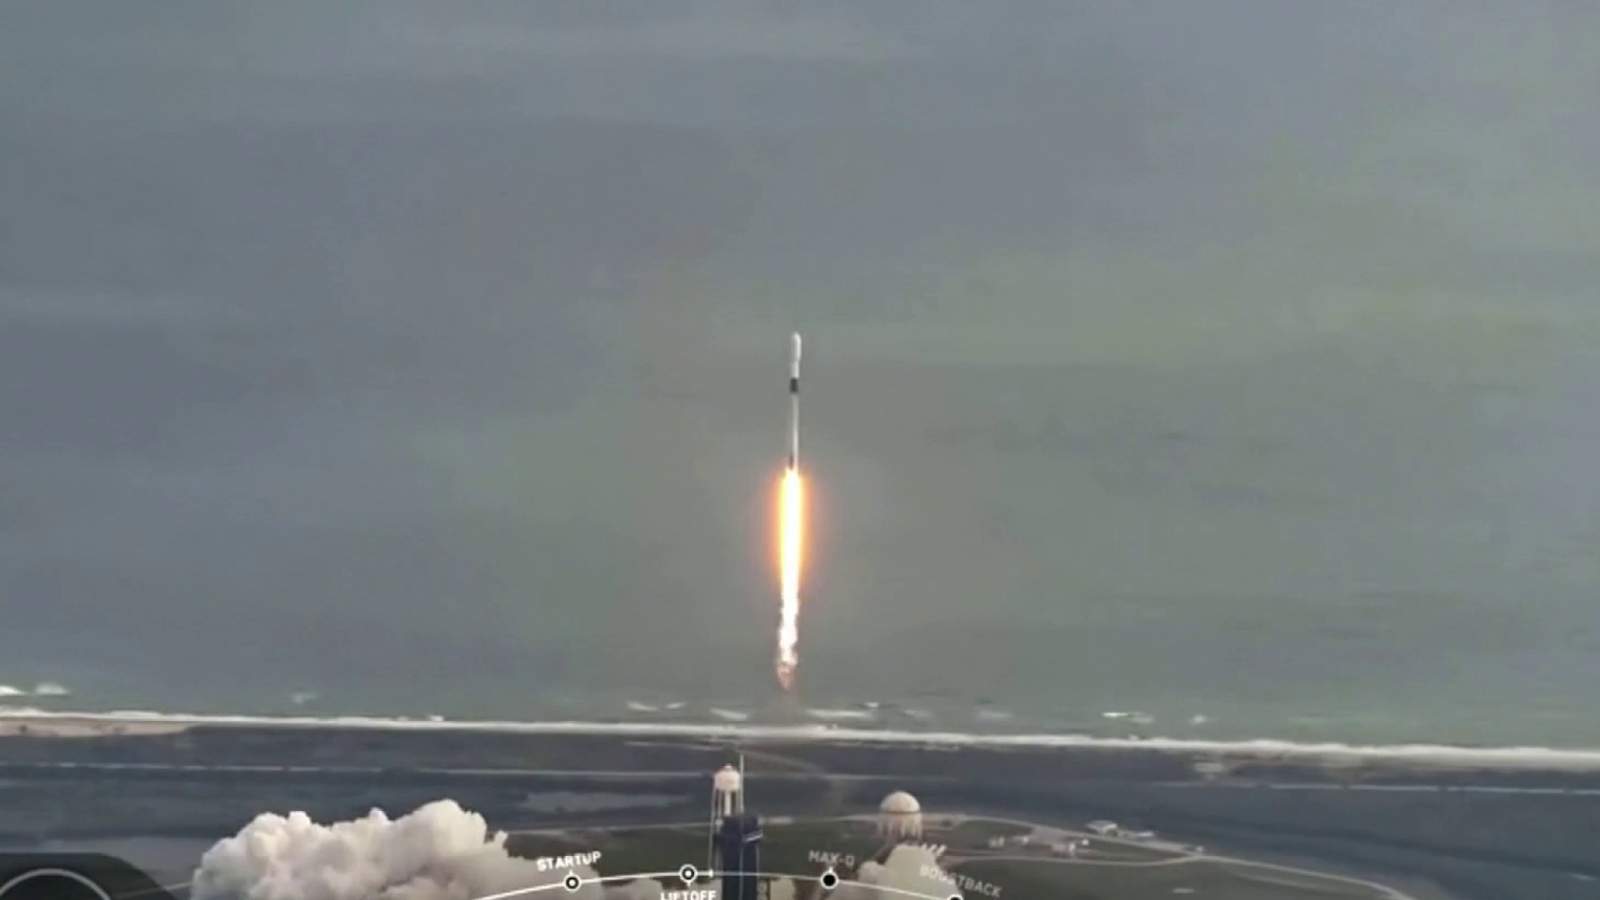 WATCH: SpaceX launches last rocket of 2020 from Kennedy Space Center